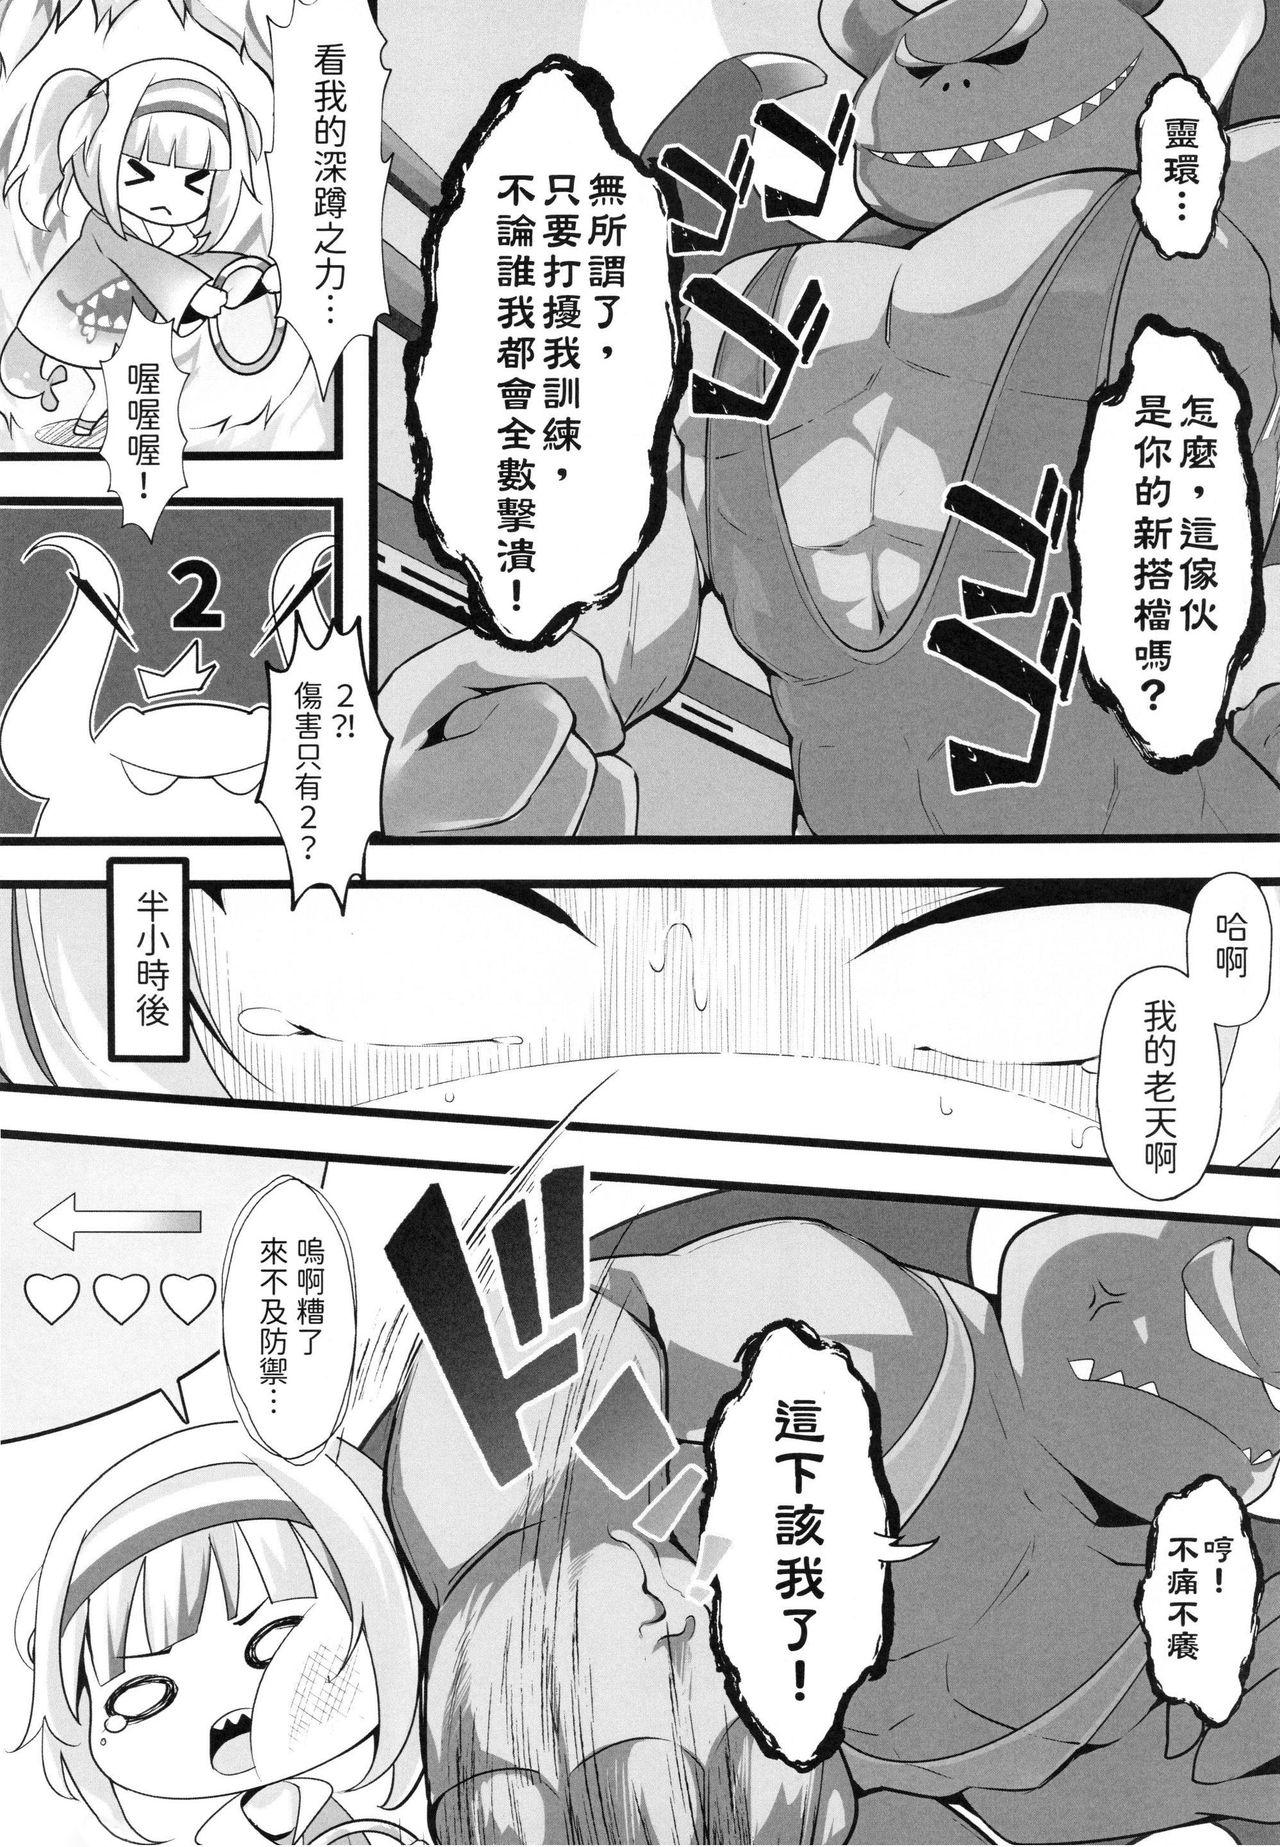 Ass Lick 【台灣FF37】[ちやみ] Let's Sweat (hololive) (Gawr Gura) (Vtuber) [Chinese] [Decensored] - Hololive Ring fit adventure Cunnilingus - Page 5